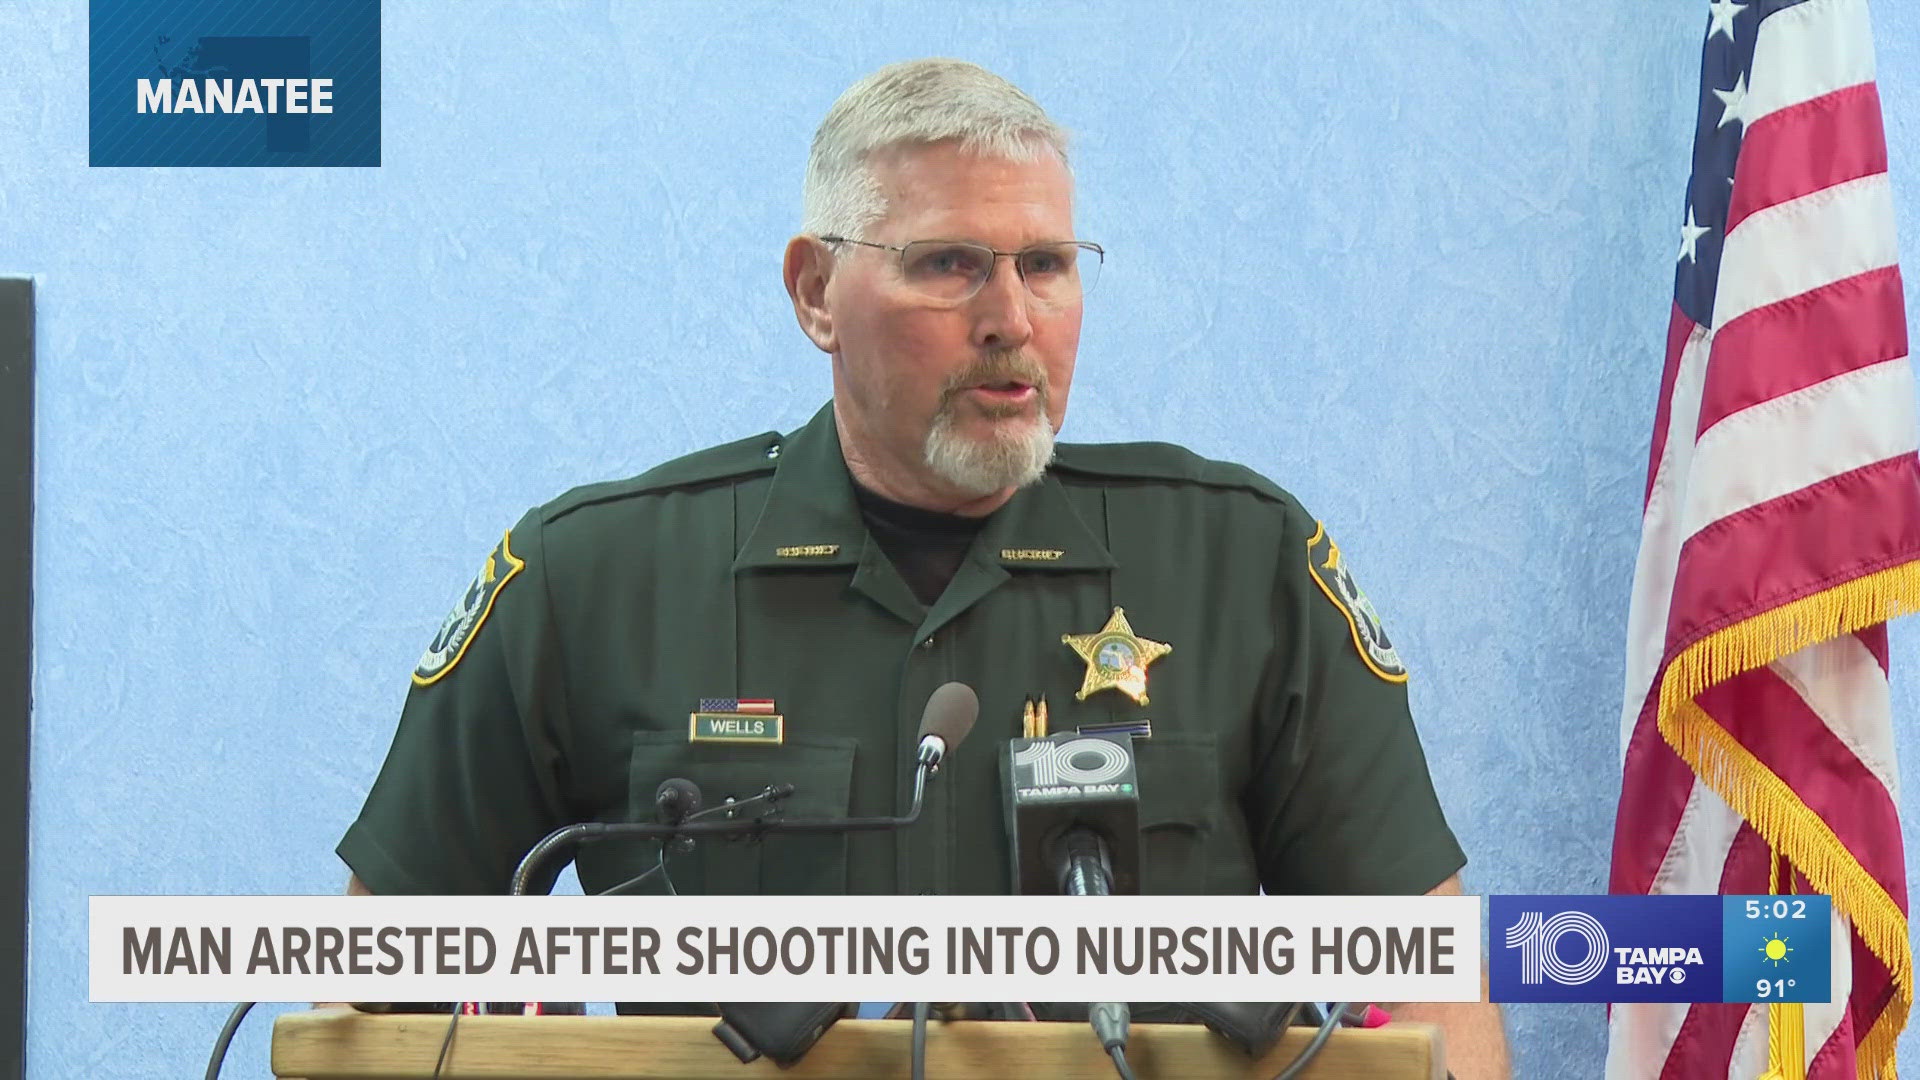 Sheriff Wells said investigators still don't know why he was trying to get into the nursing home he crashed into in the first place.